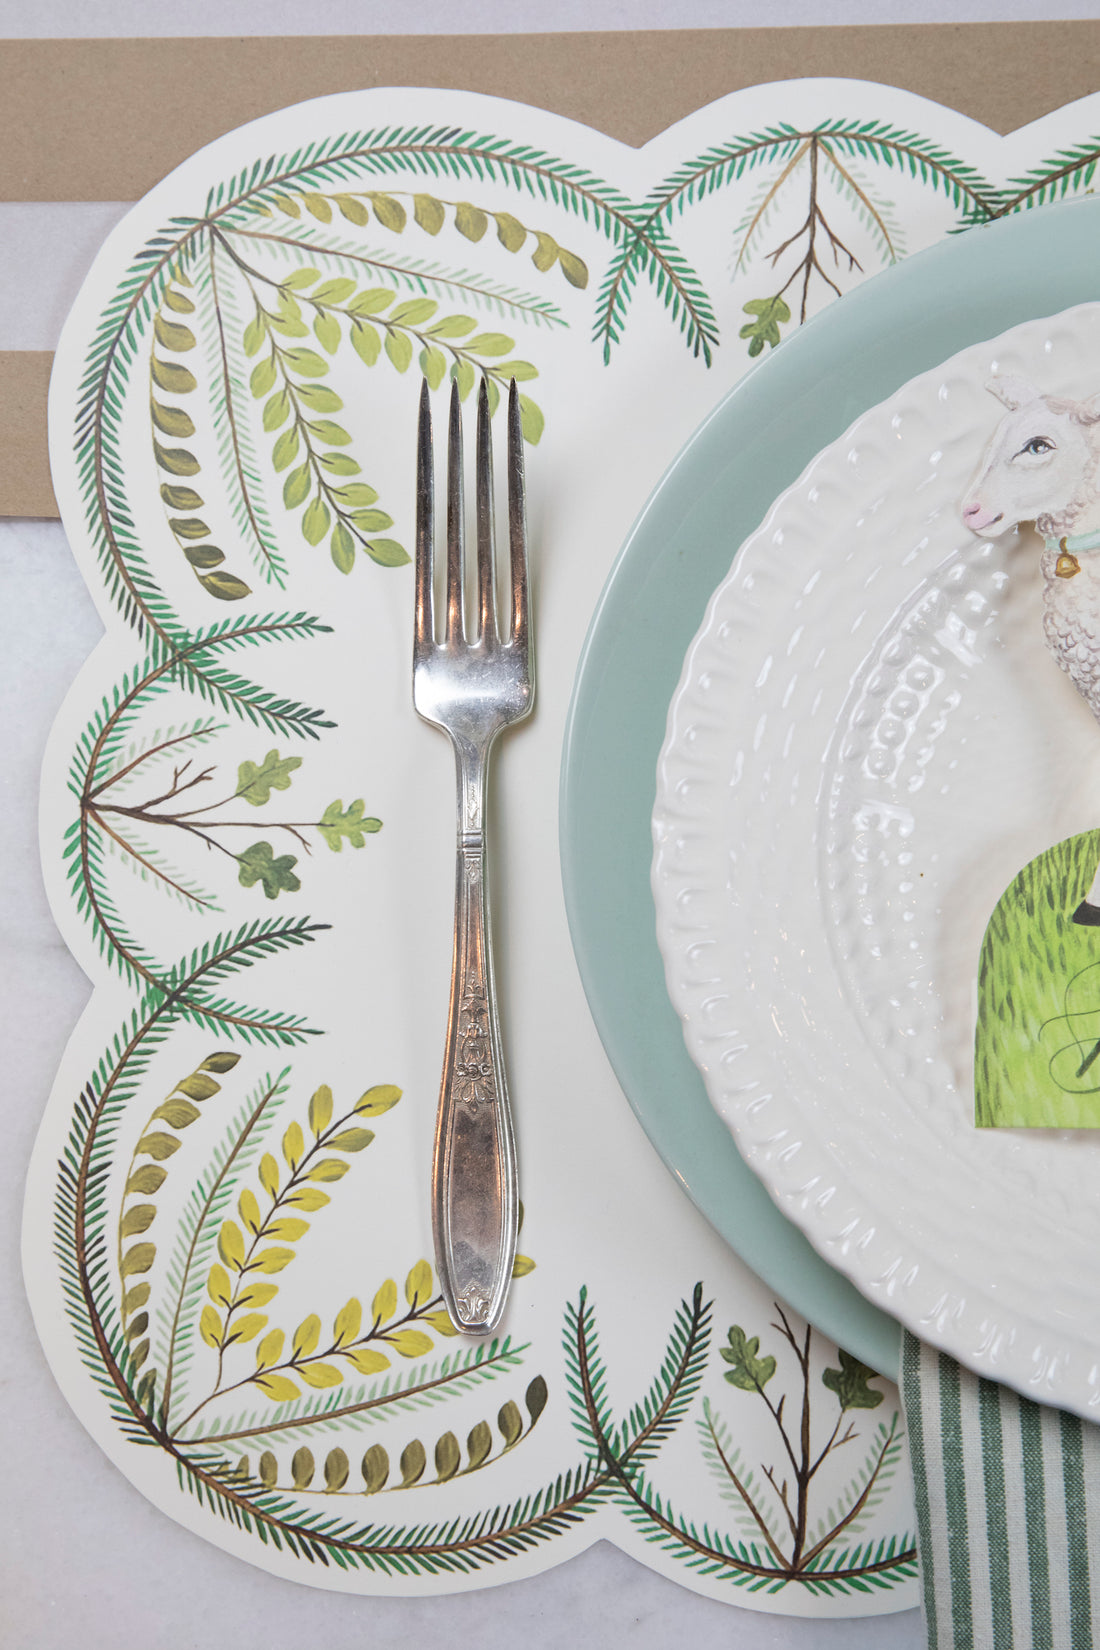 Close-up of the Die-cut Scalloped Seedling Placemat under an elegant springtime place setting.